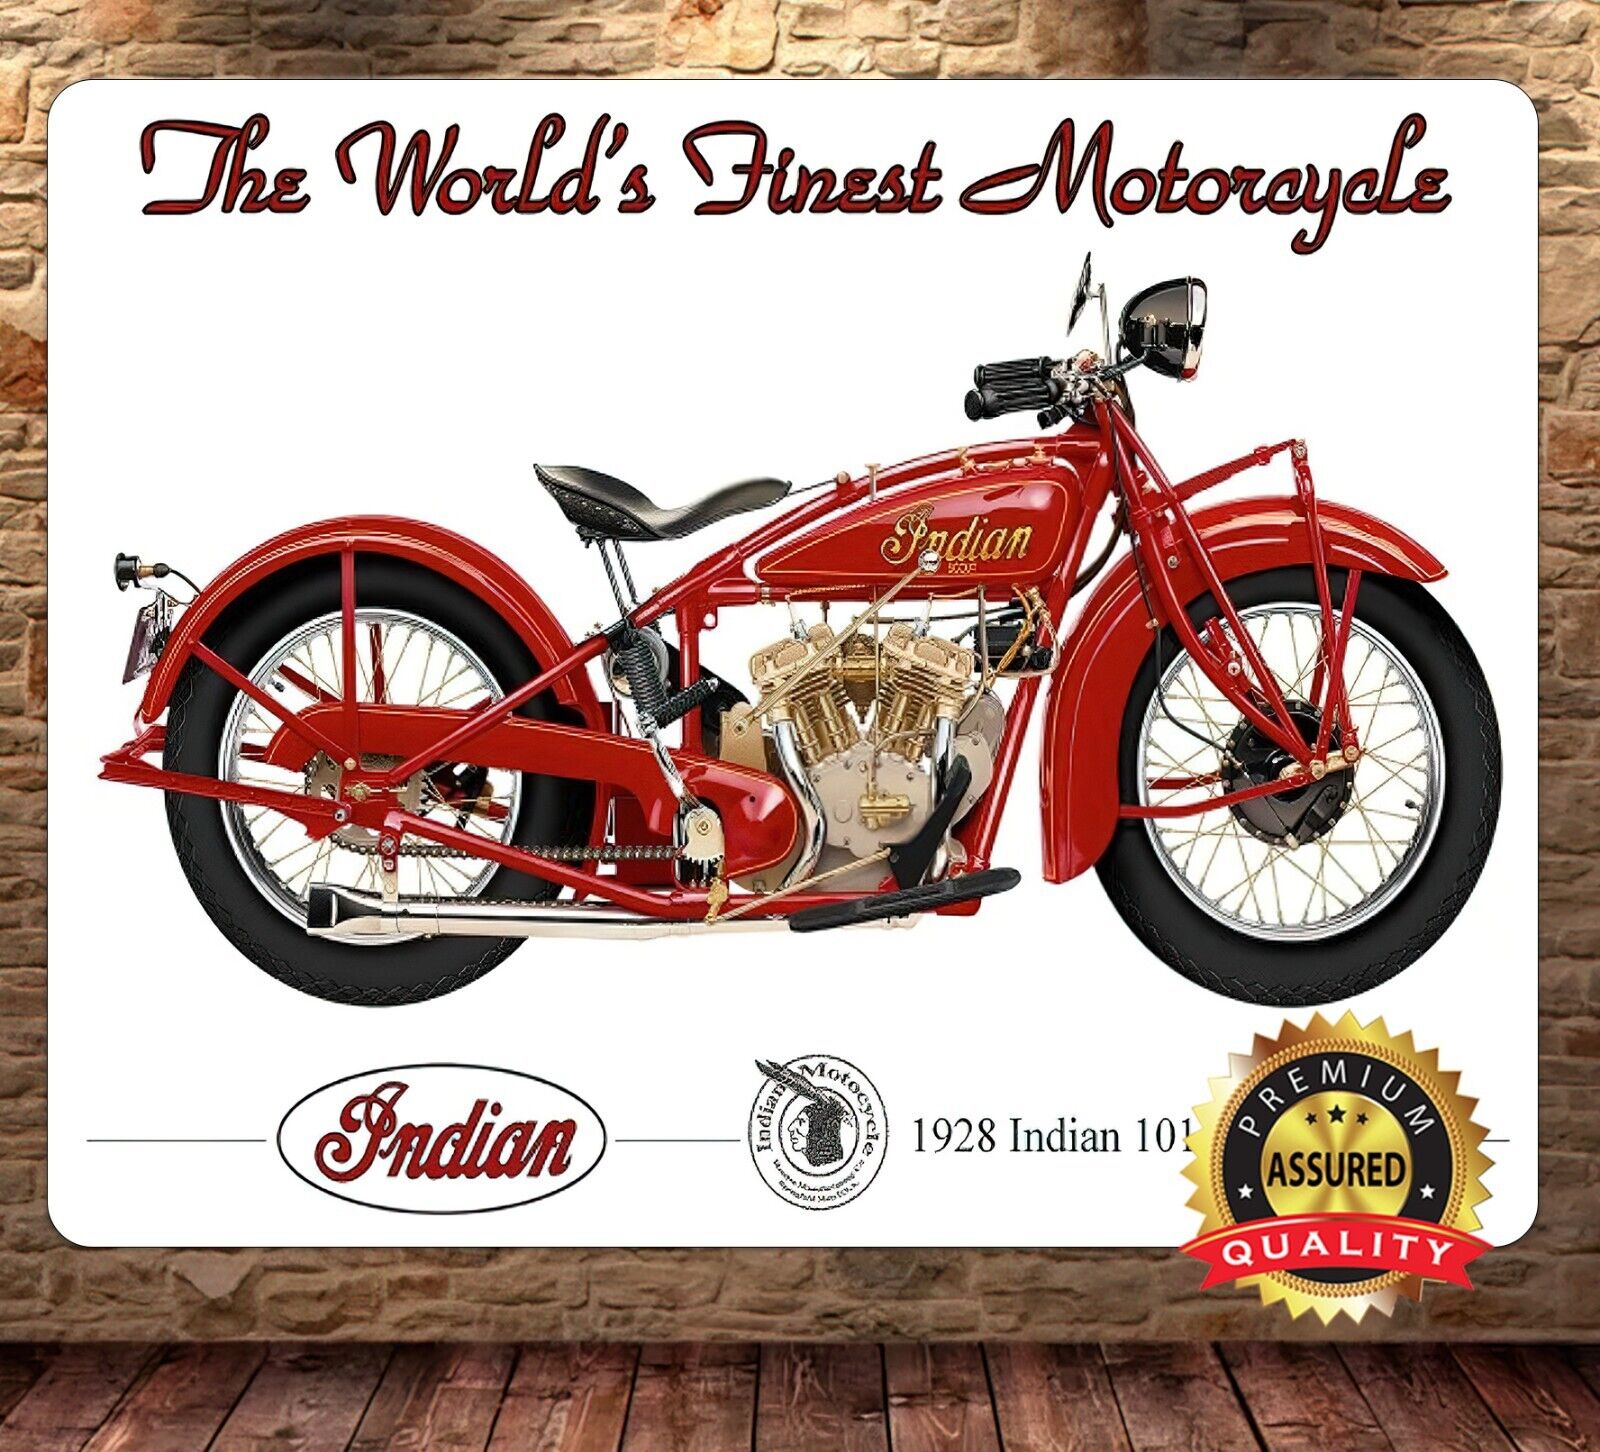 Indian Motorcycles - 1928 - World's Finest Motorcycles - Metal Sign 11 x 14